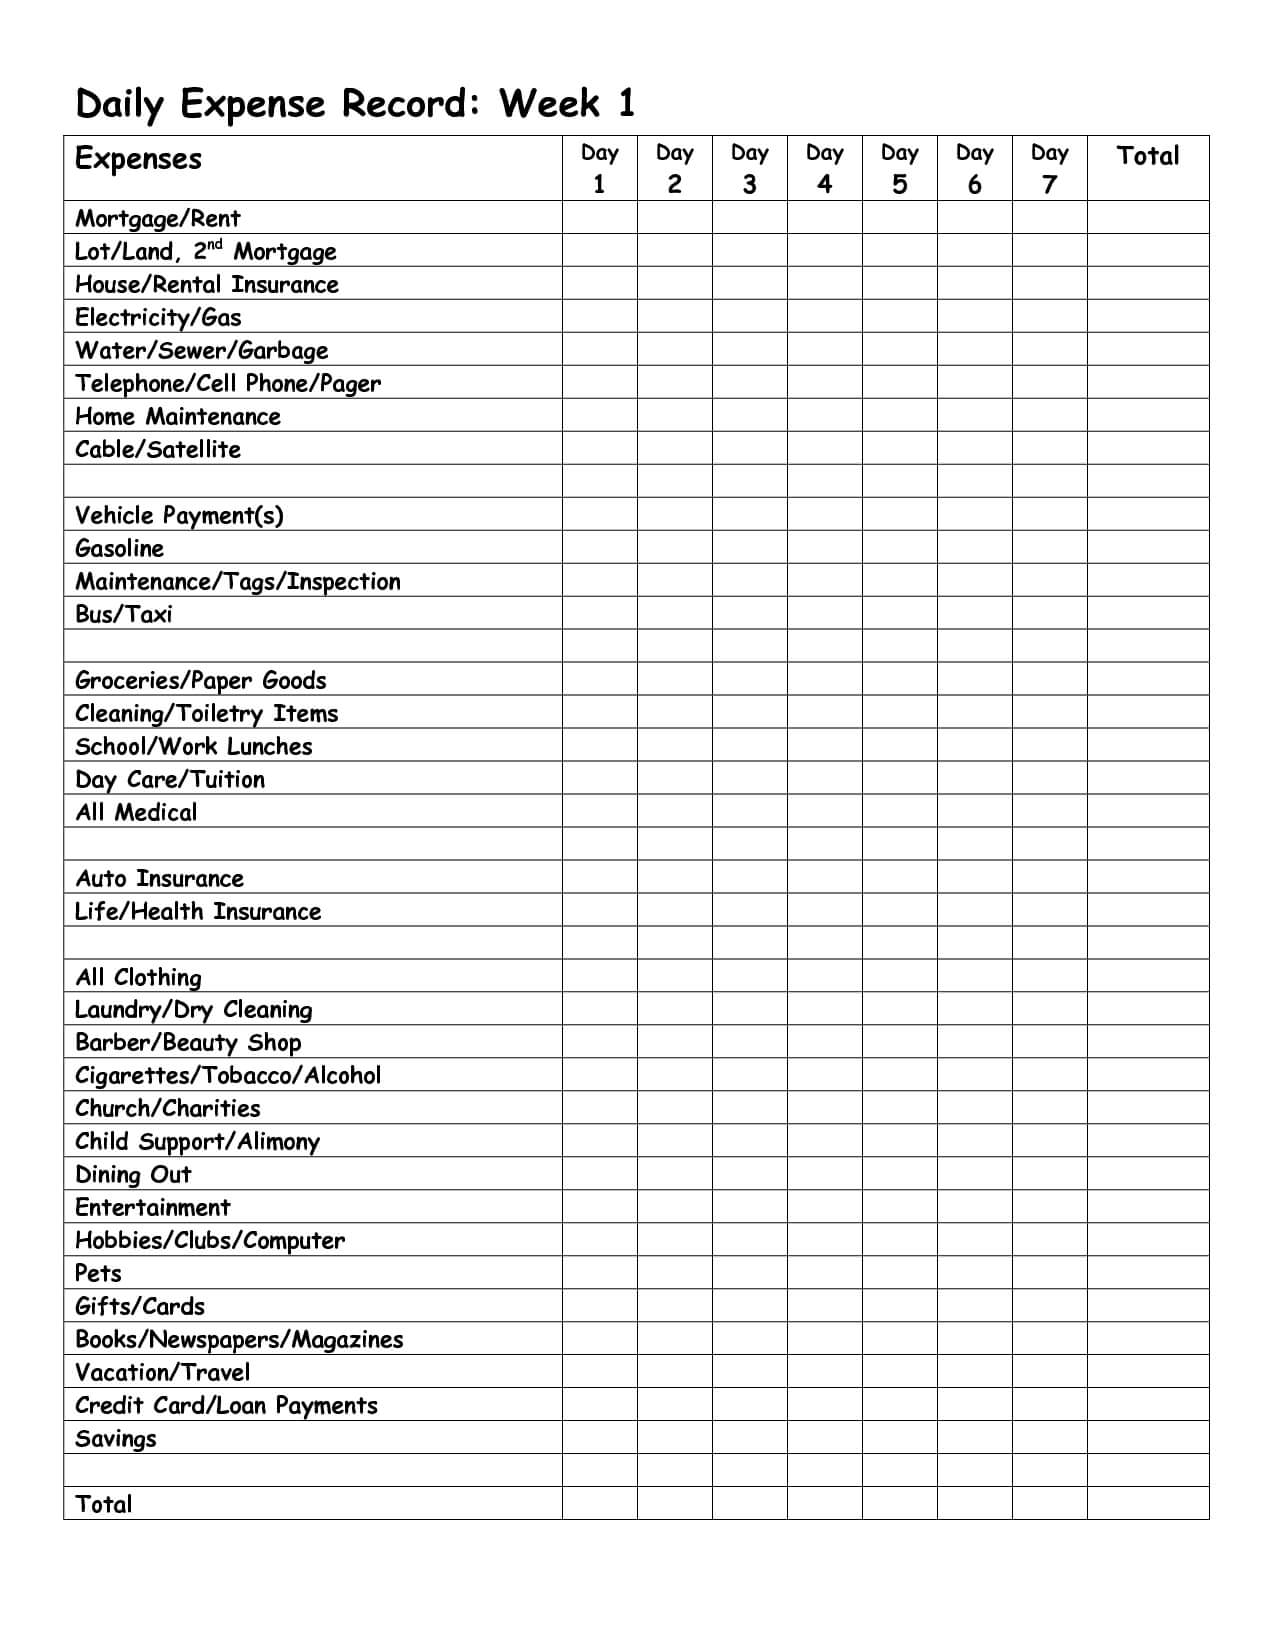 Monthly Expense Report Template | Daily Expense Record Week Throughout Gas Mileage Expense Report Template